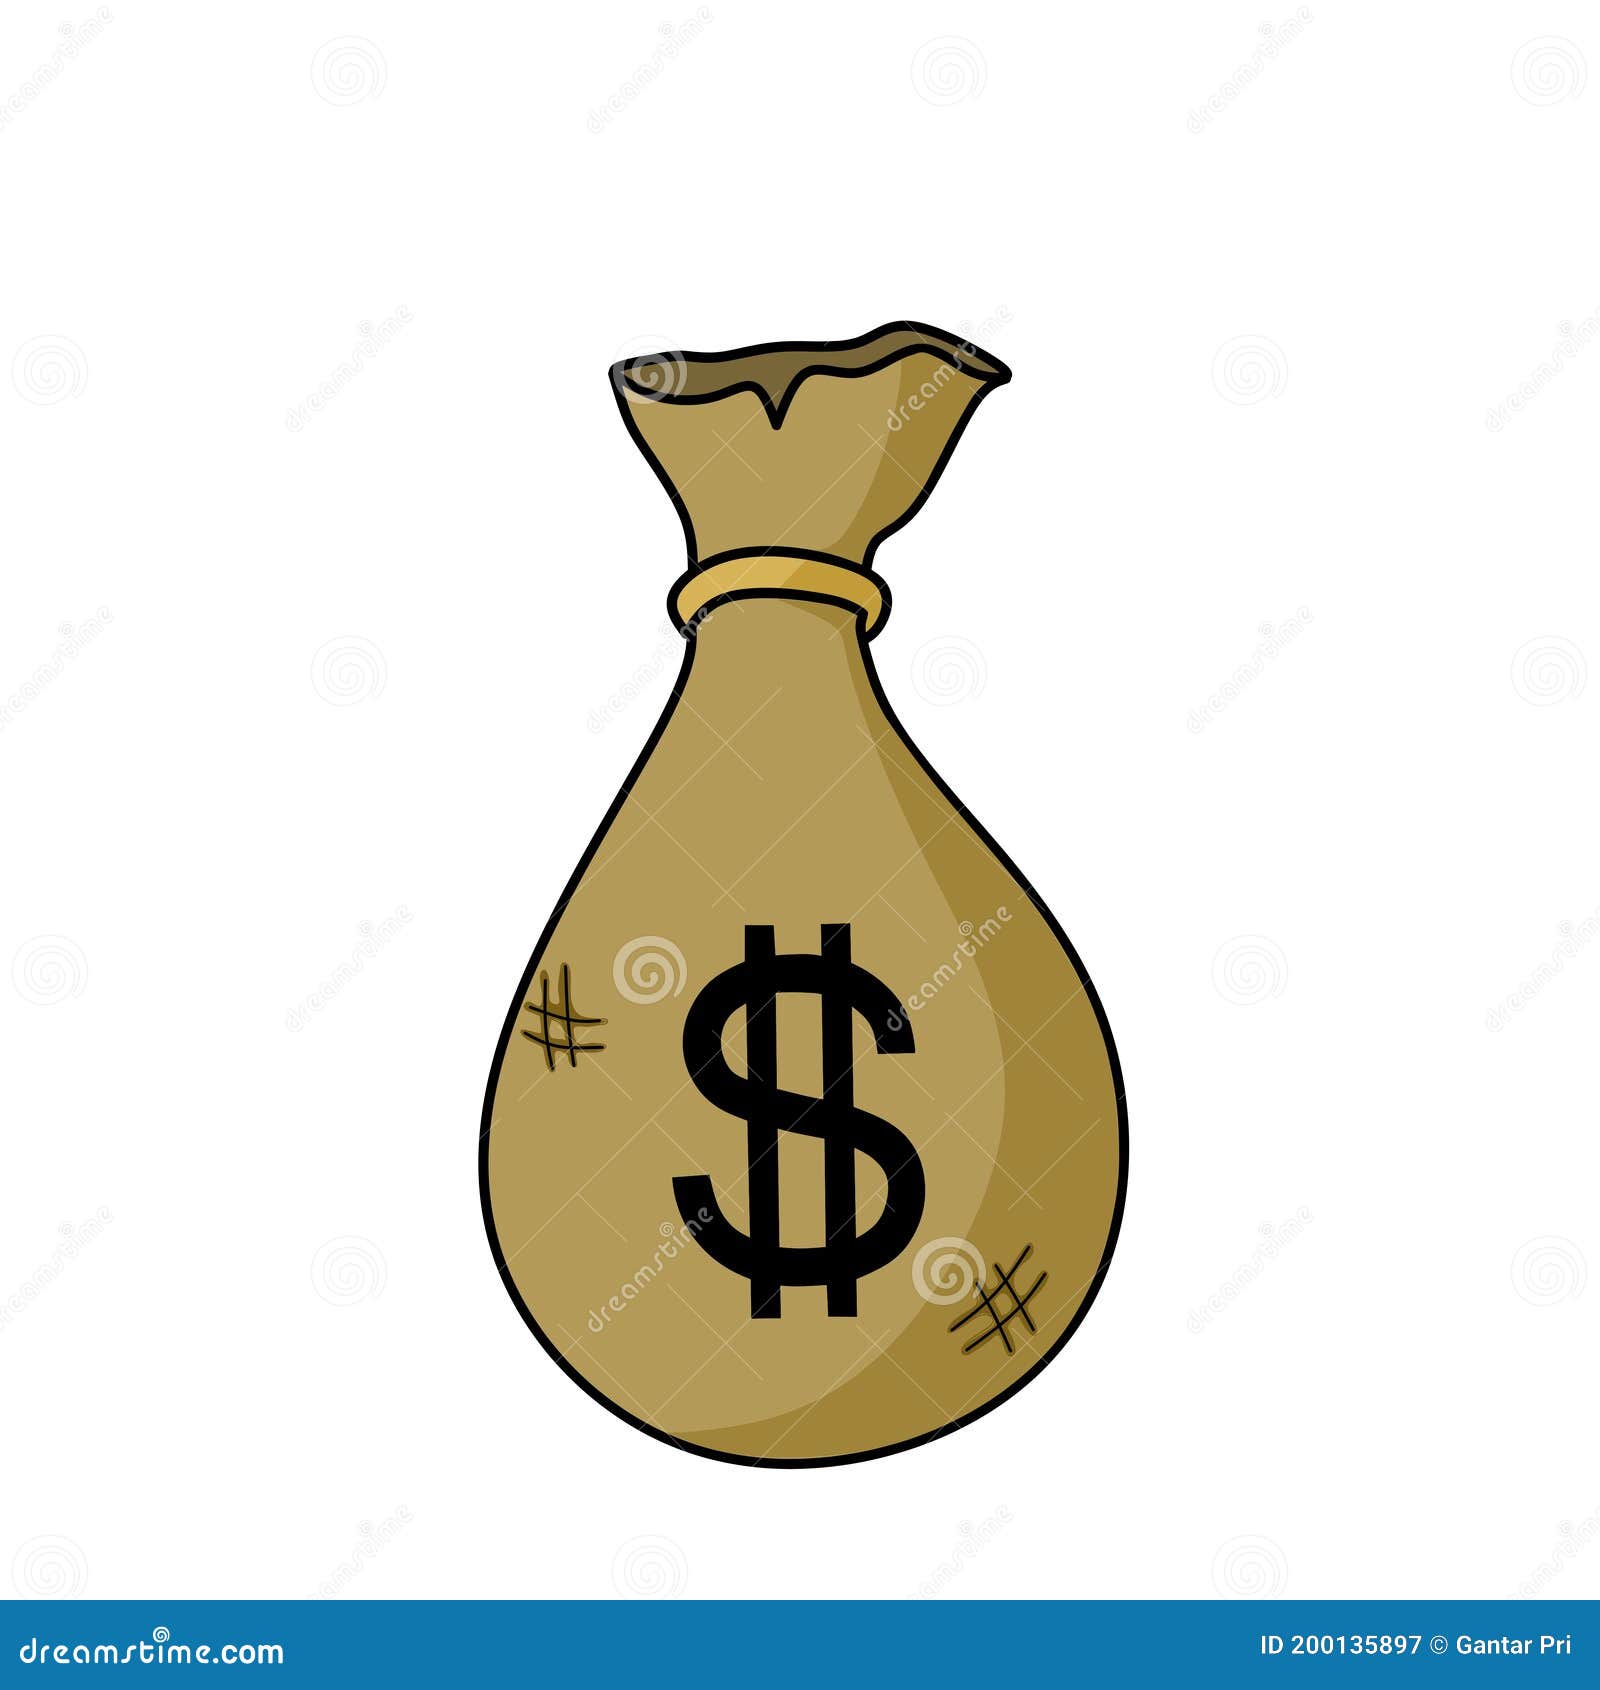 a bag of money with a dollar sign on it is shown in the middle of